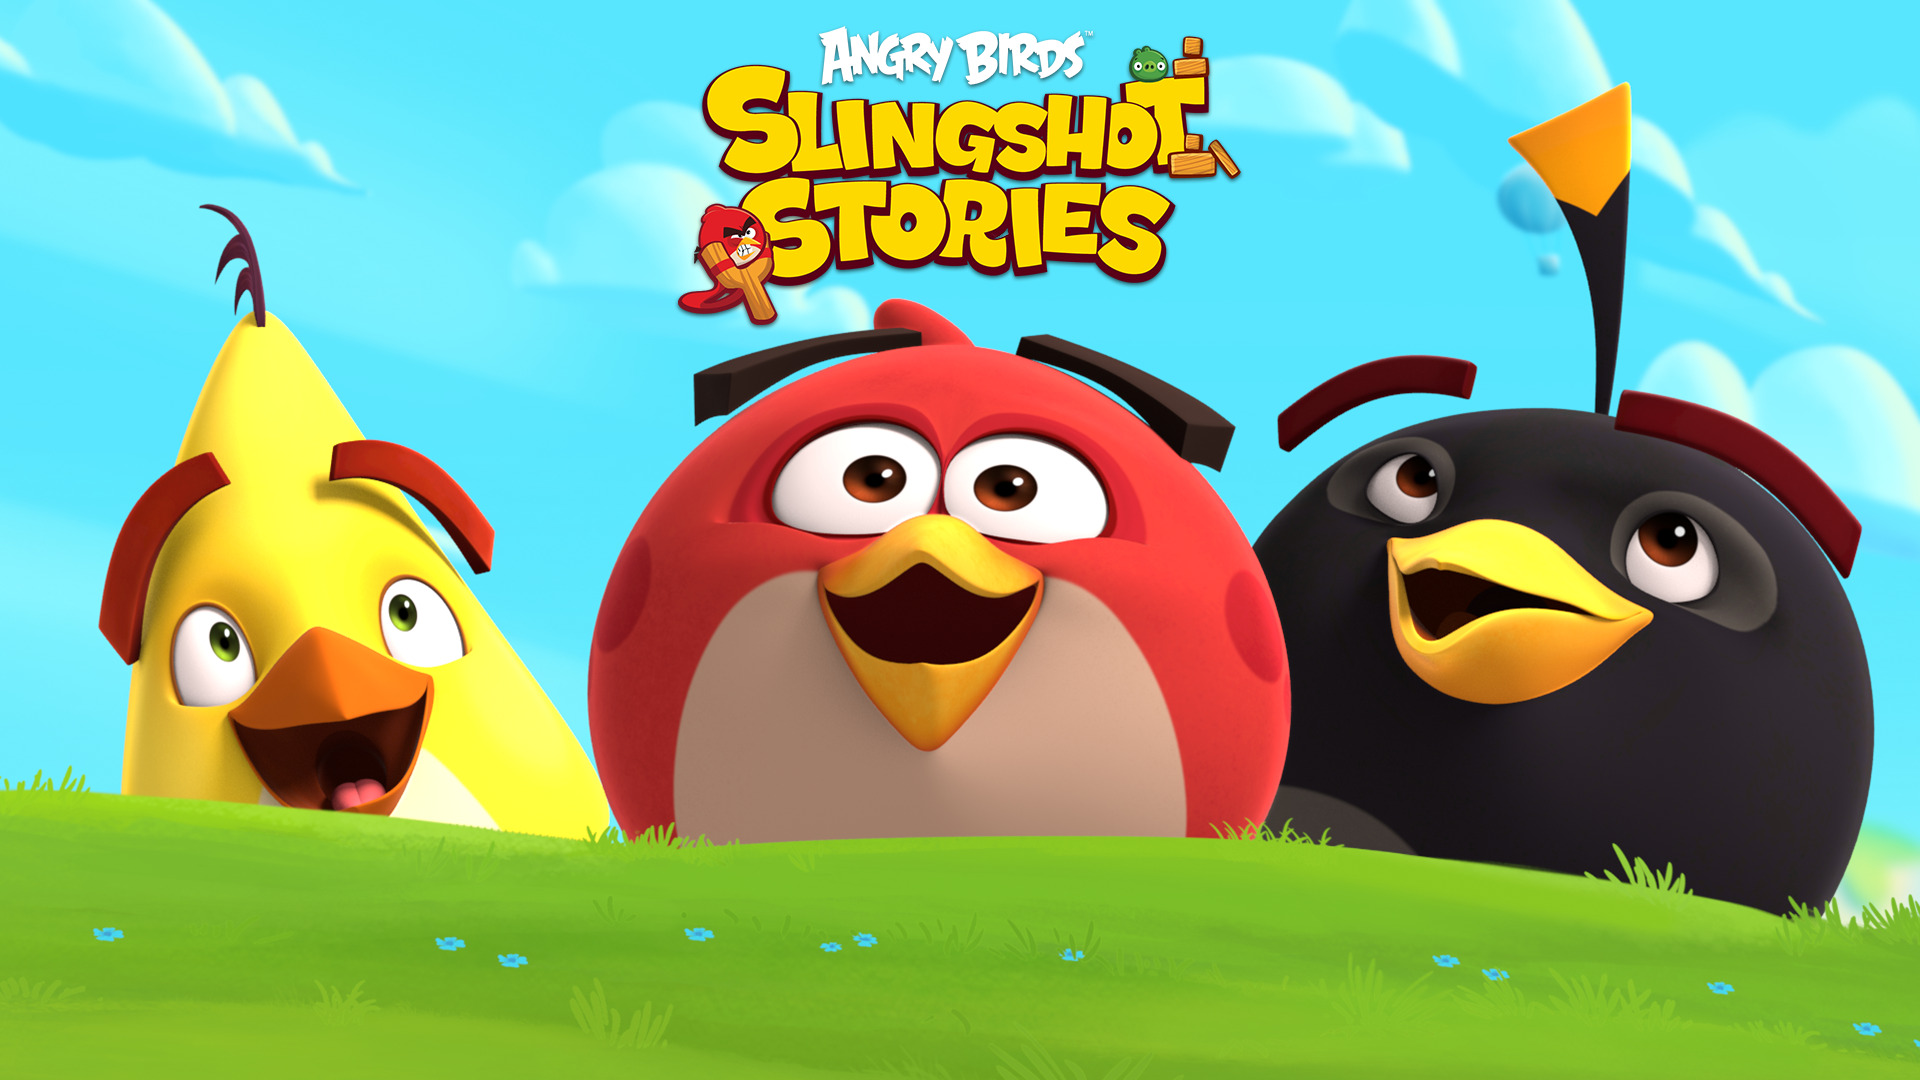 Angry Birds Slingshot Stories | Angry Birds